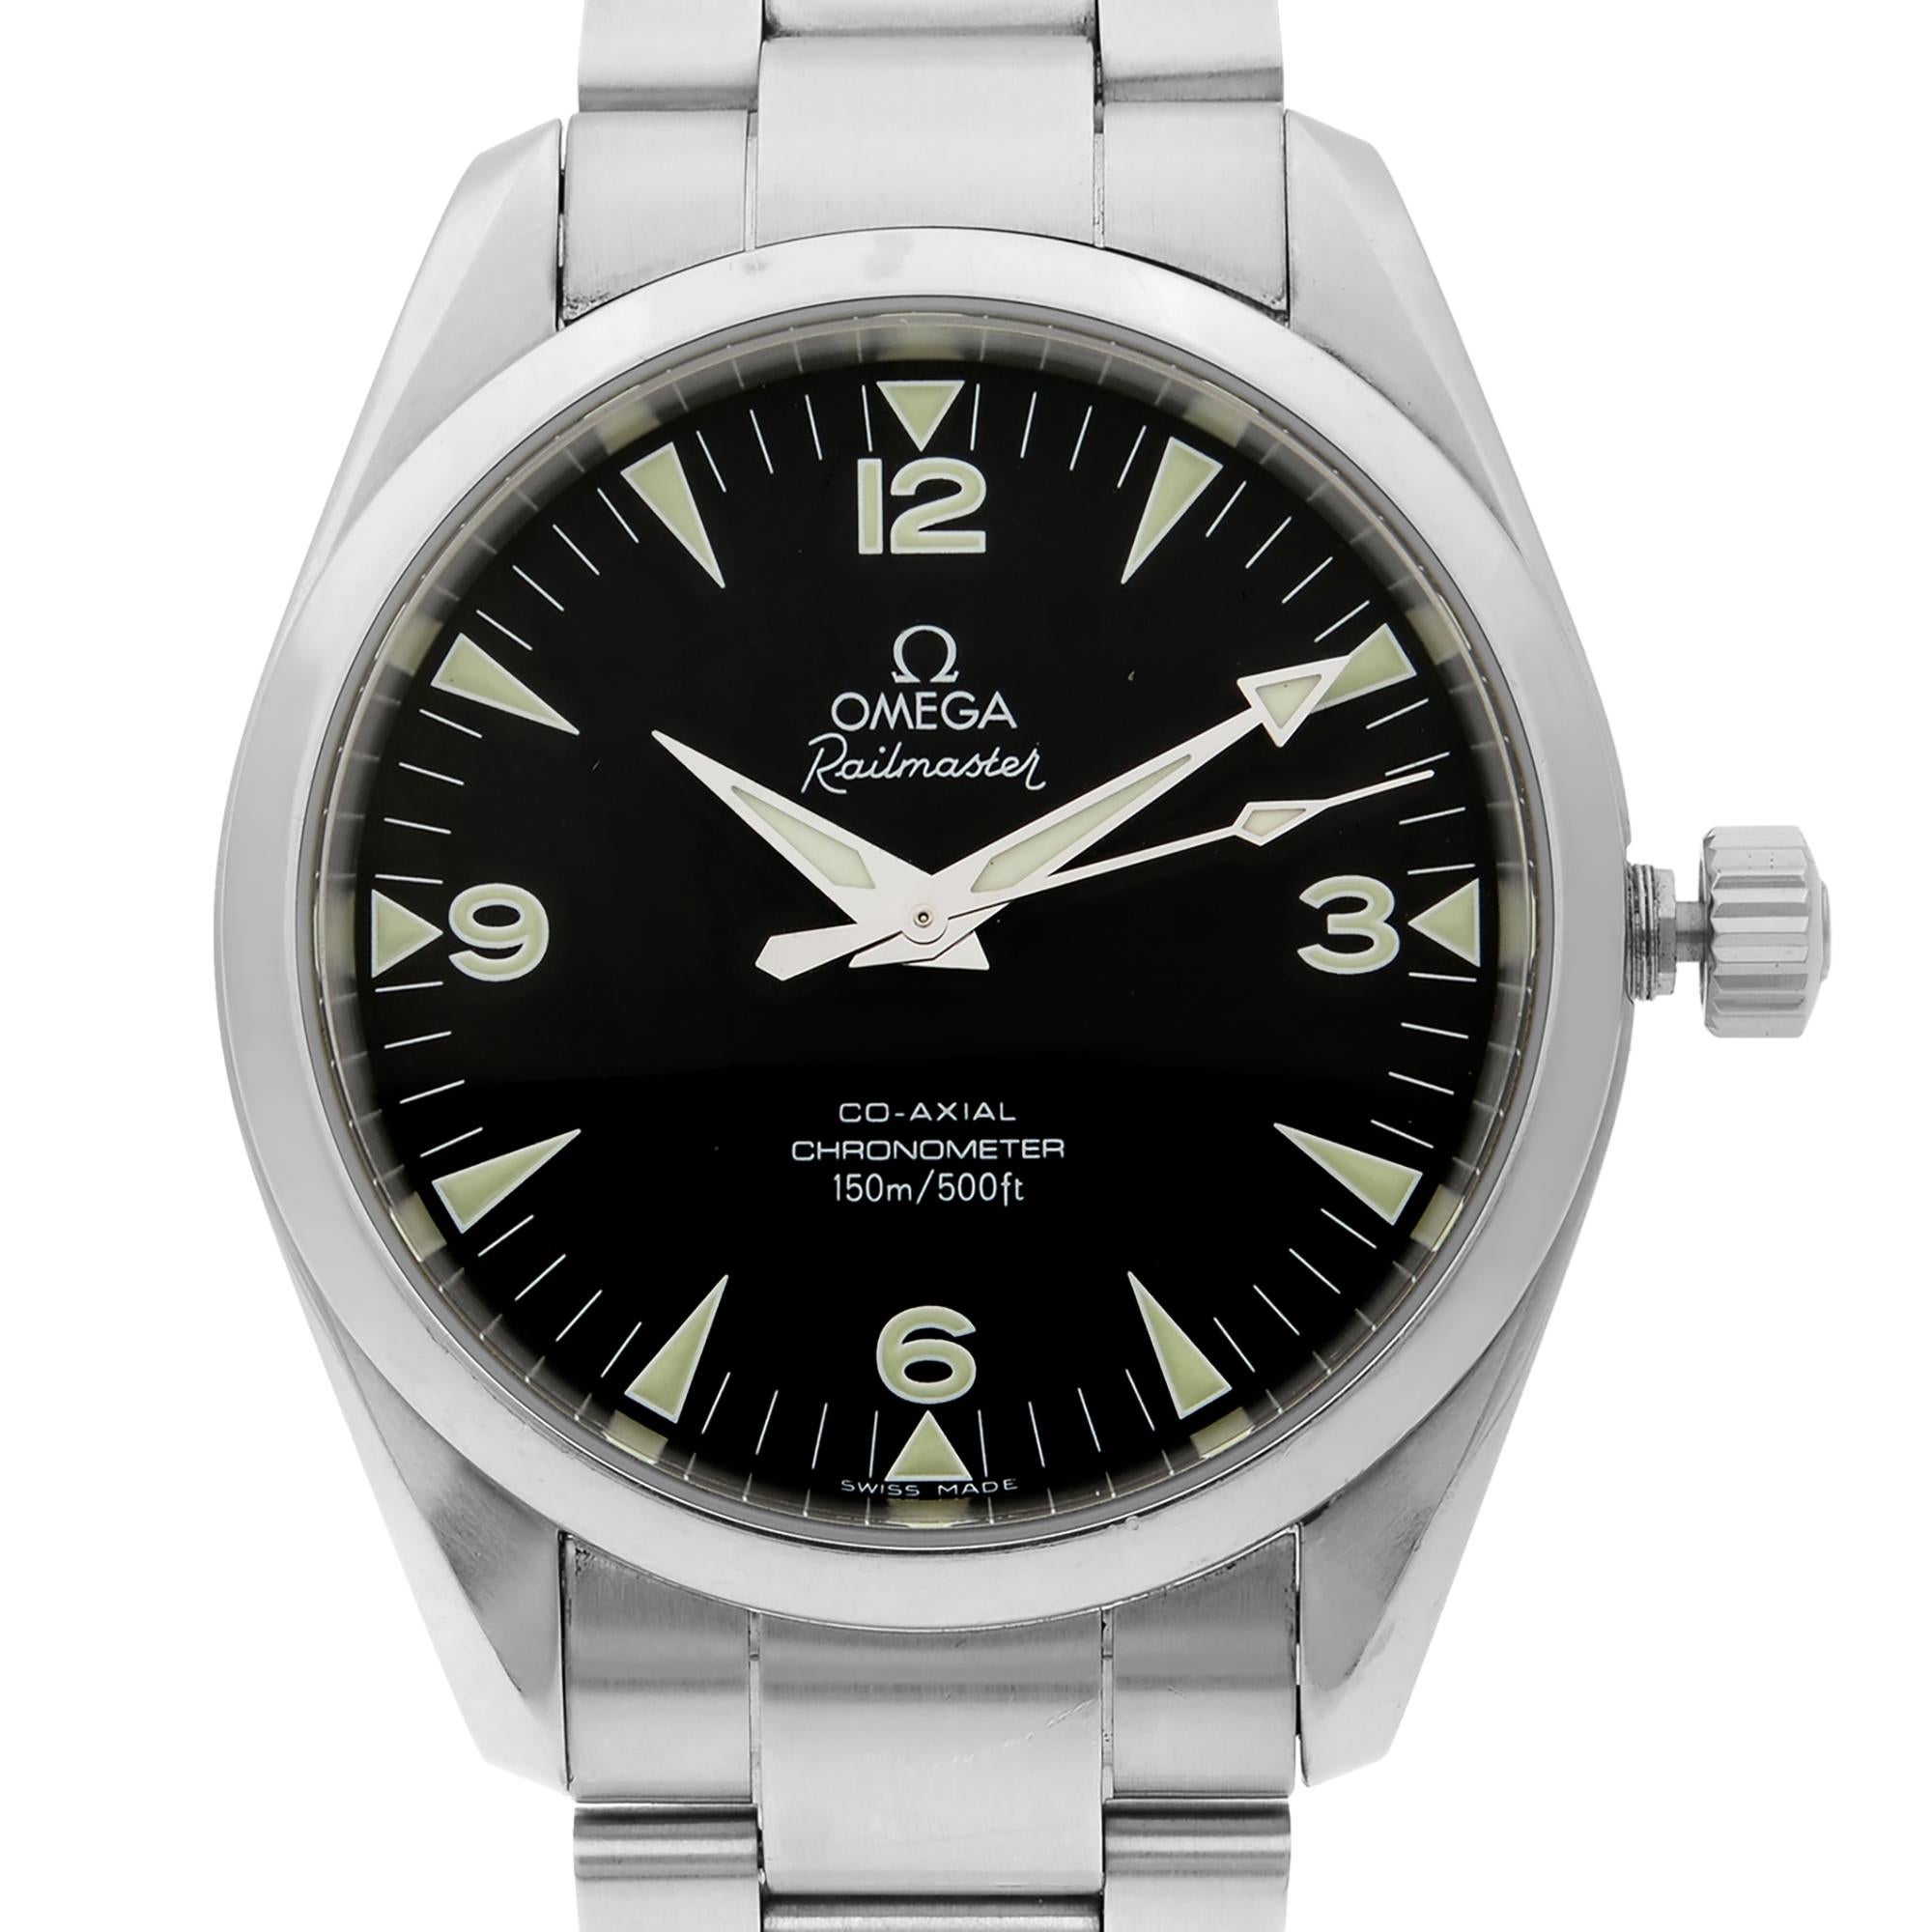 Pre Owned Omega Seamaster Aqua Terra Railmaster Steel Black Dial 39mm Mens Watch 2503.52.00. This Beautiful Timepiece Features: Stainless Steel Case & Bracelet, Fixed Stainless Steel Bezel. Black Dial with Silver-Tone Hands and Index Hour Markers.